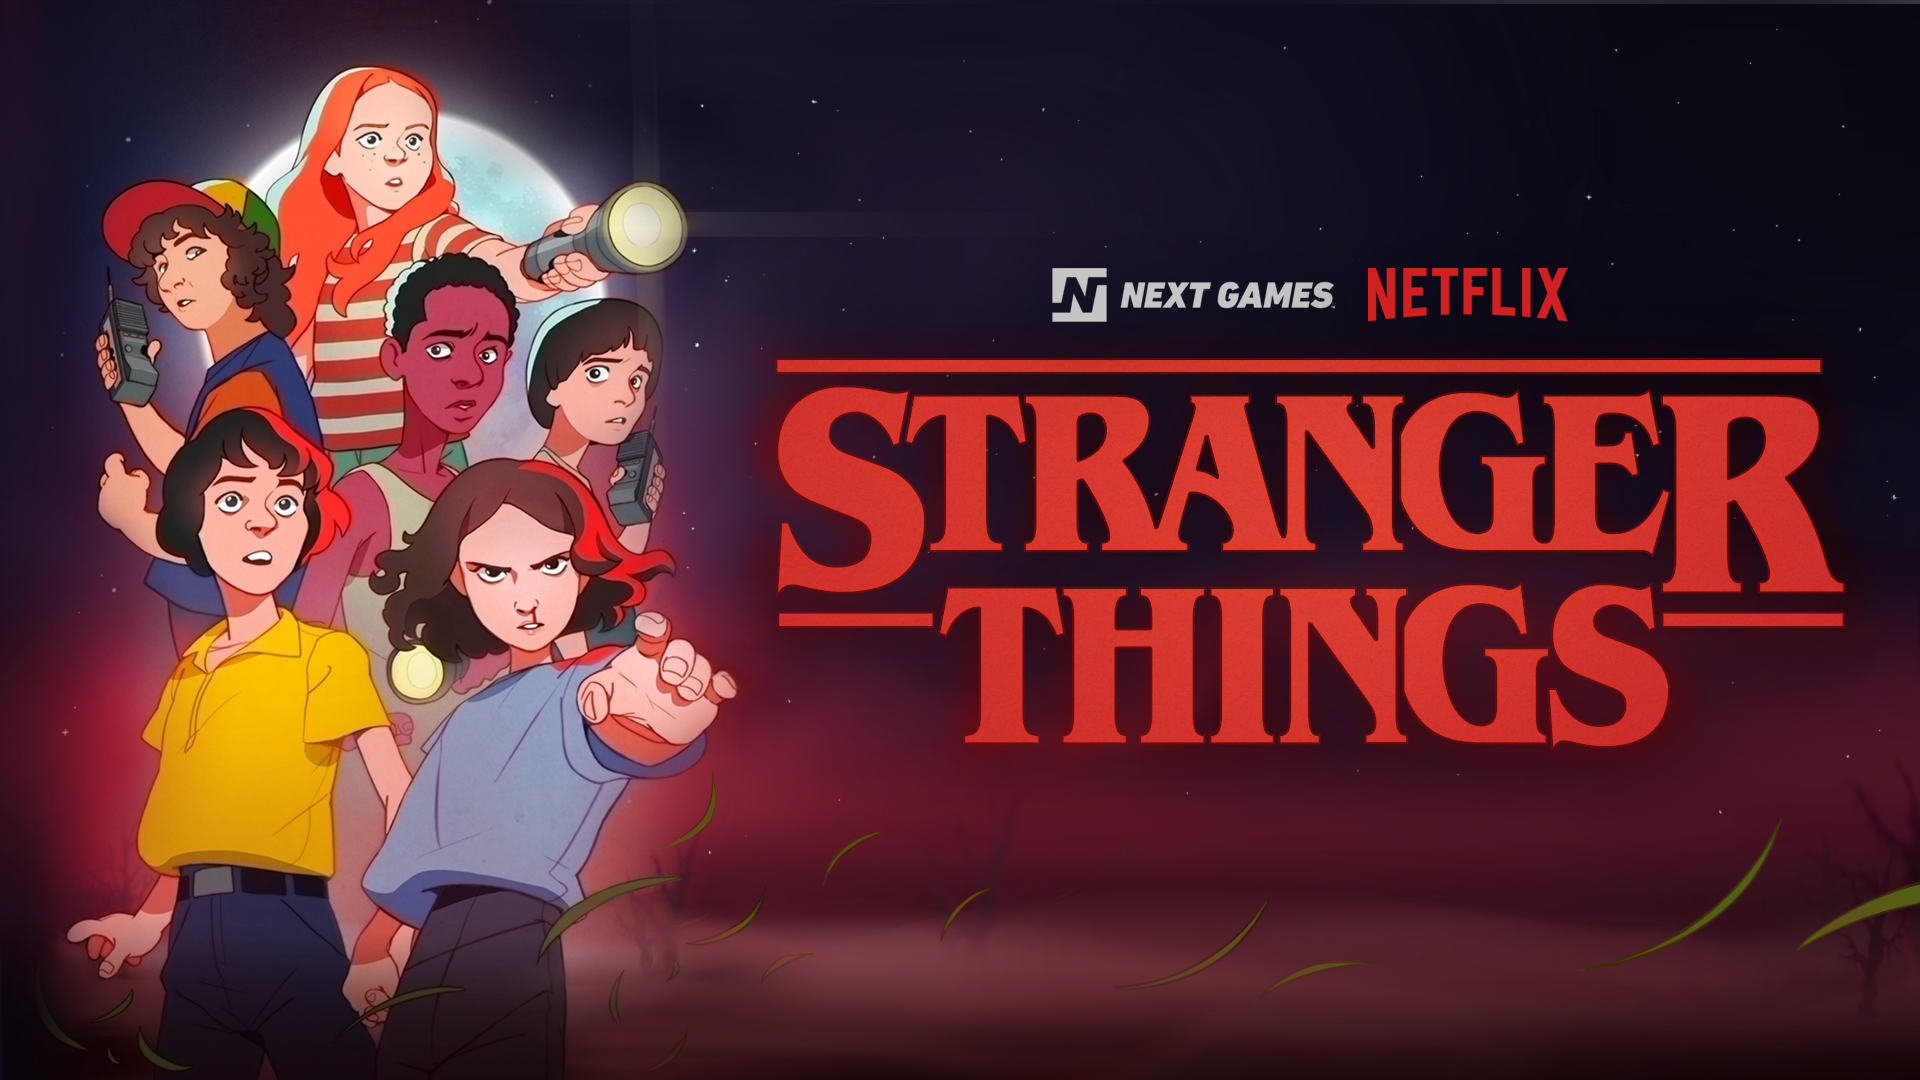 Would you guys like a Stranger Things cartoon that looks like this game???